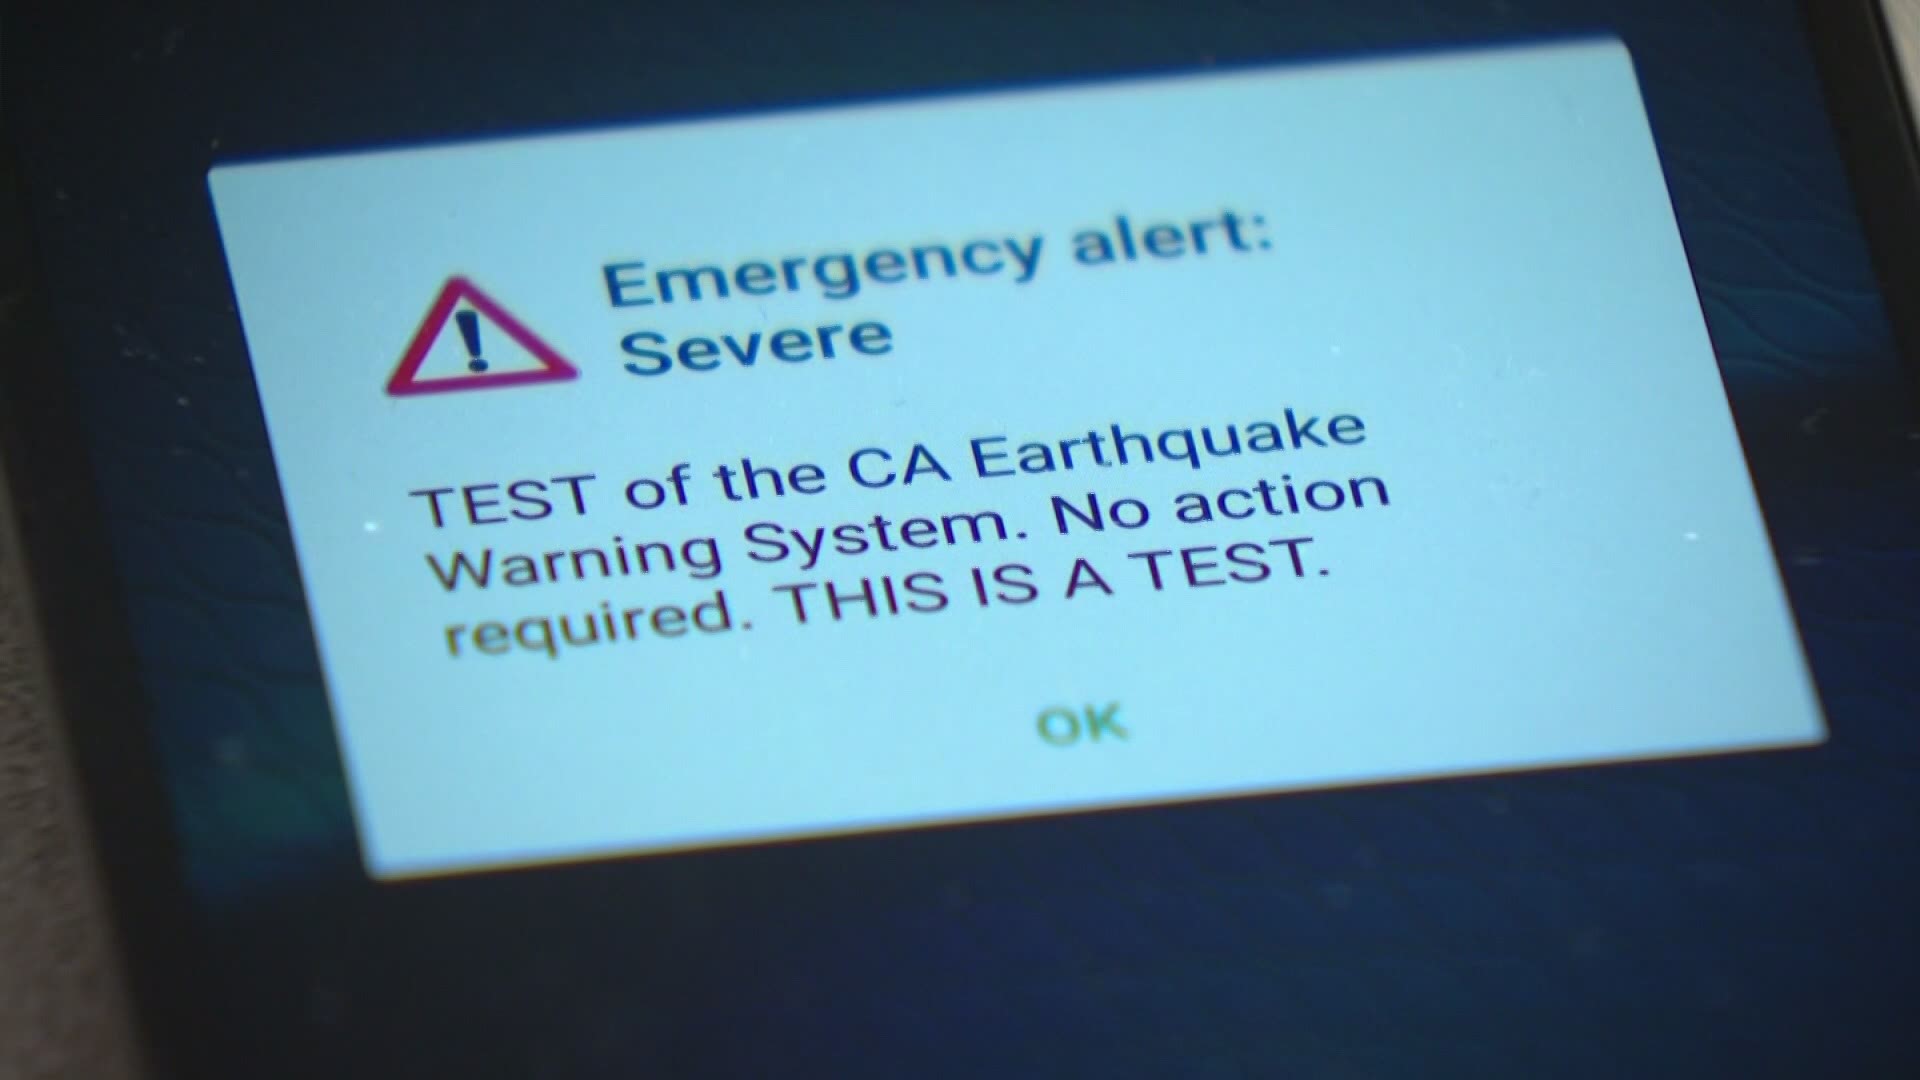 People in Pierce, Thurston and King Counties can participate in a test for the new emergency warning system